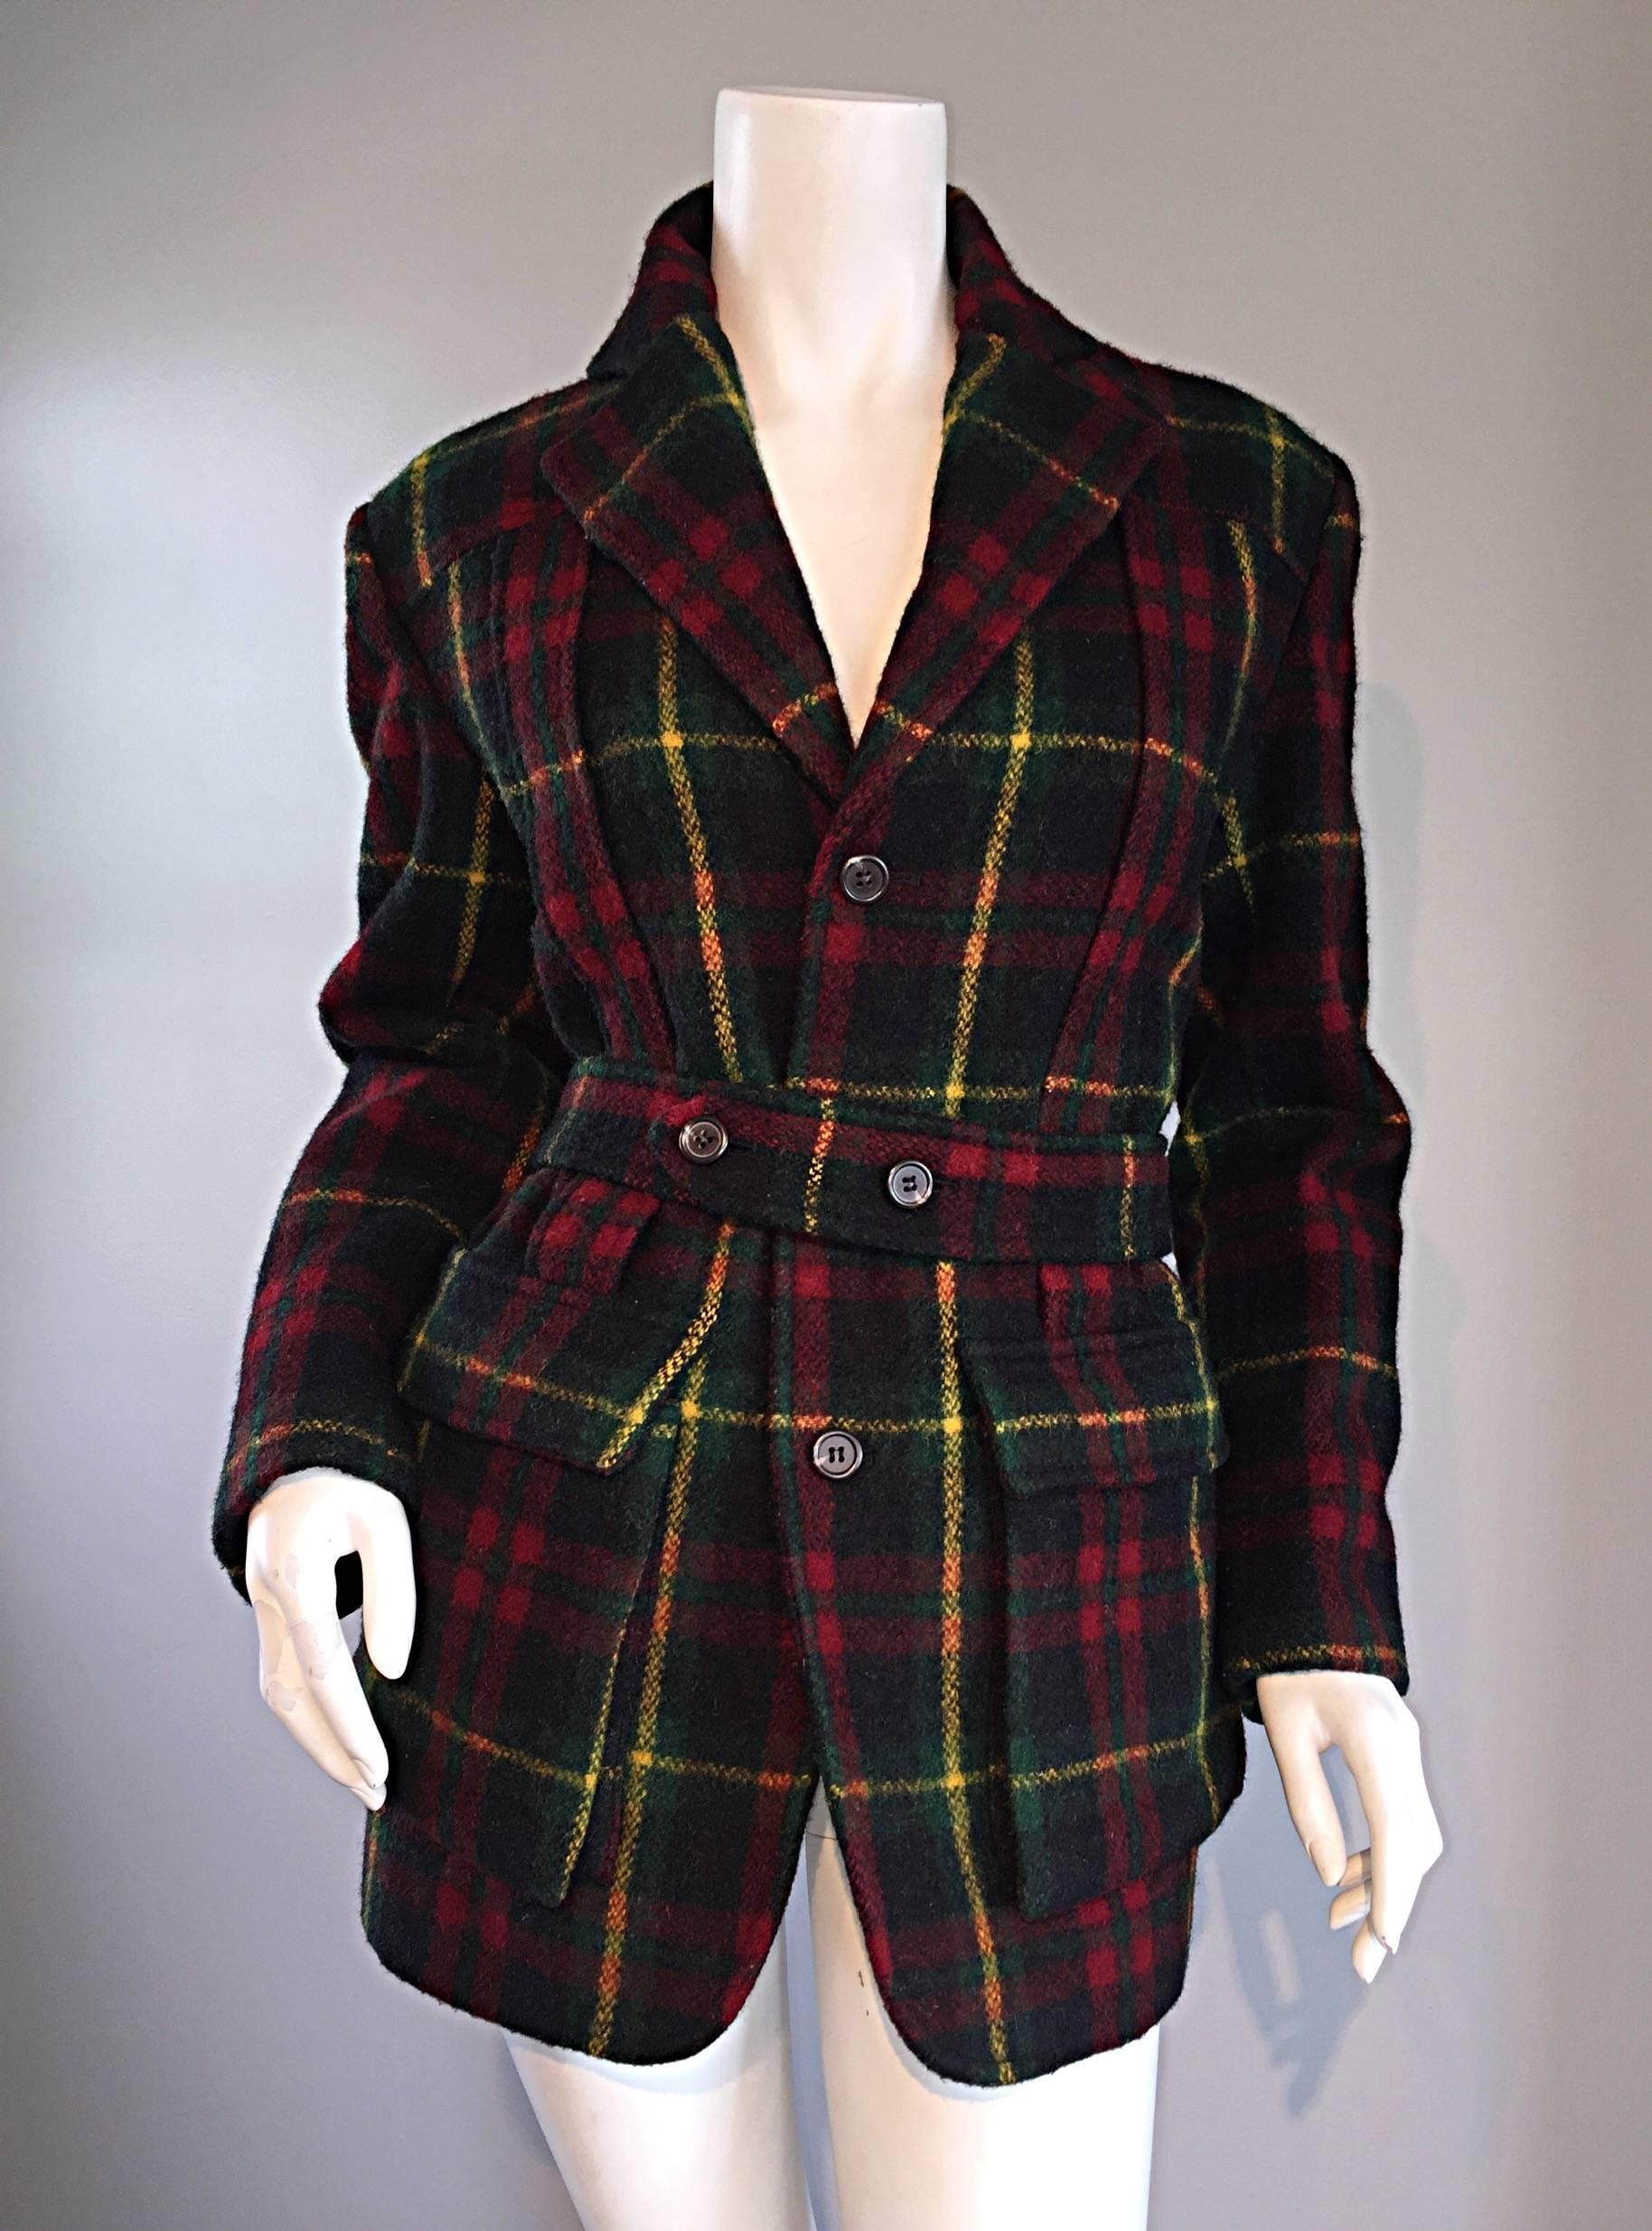 Wonderful and classic vintage RALPH LAUREN wool tartan plaid belted jacket! Signature Ralph Lauren plaid of green, red, and yellow. Detachable matching adjustable belt. Pockets at both sides of waist, and on interior. Great fit, that is not too